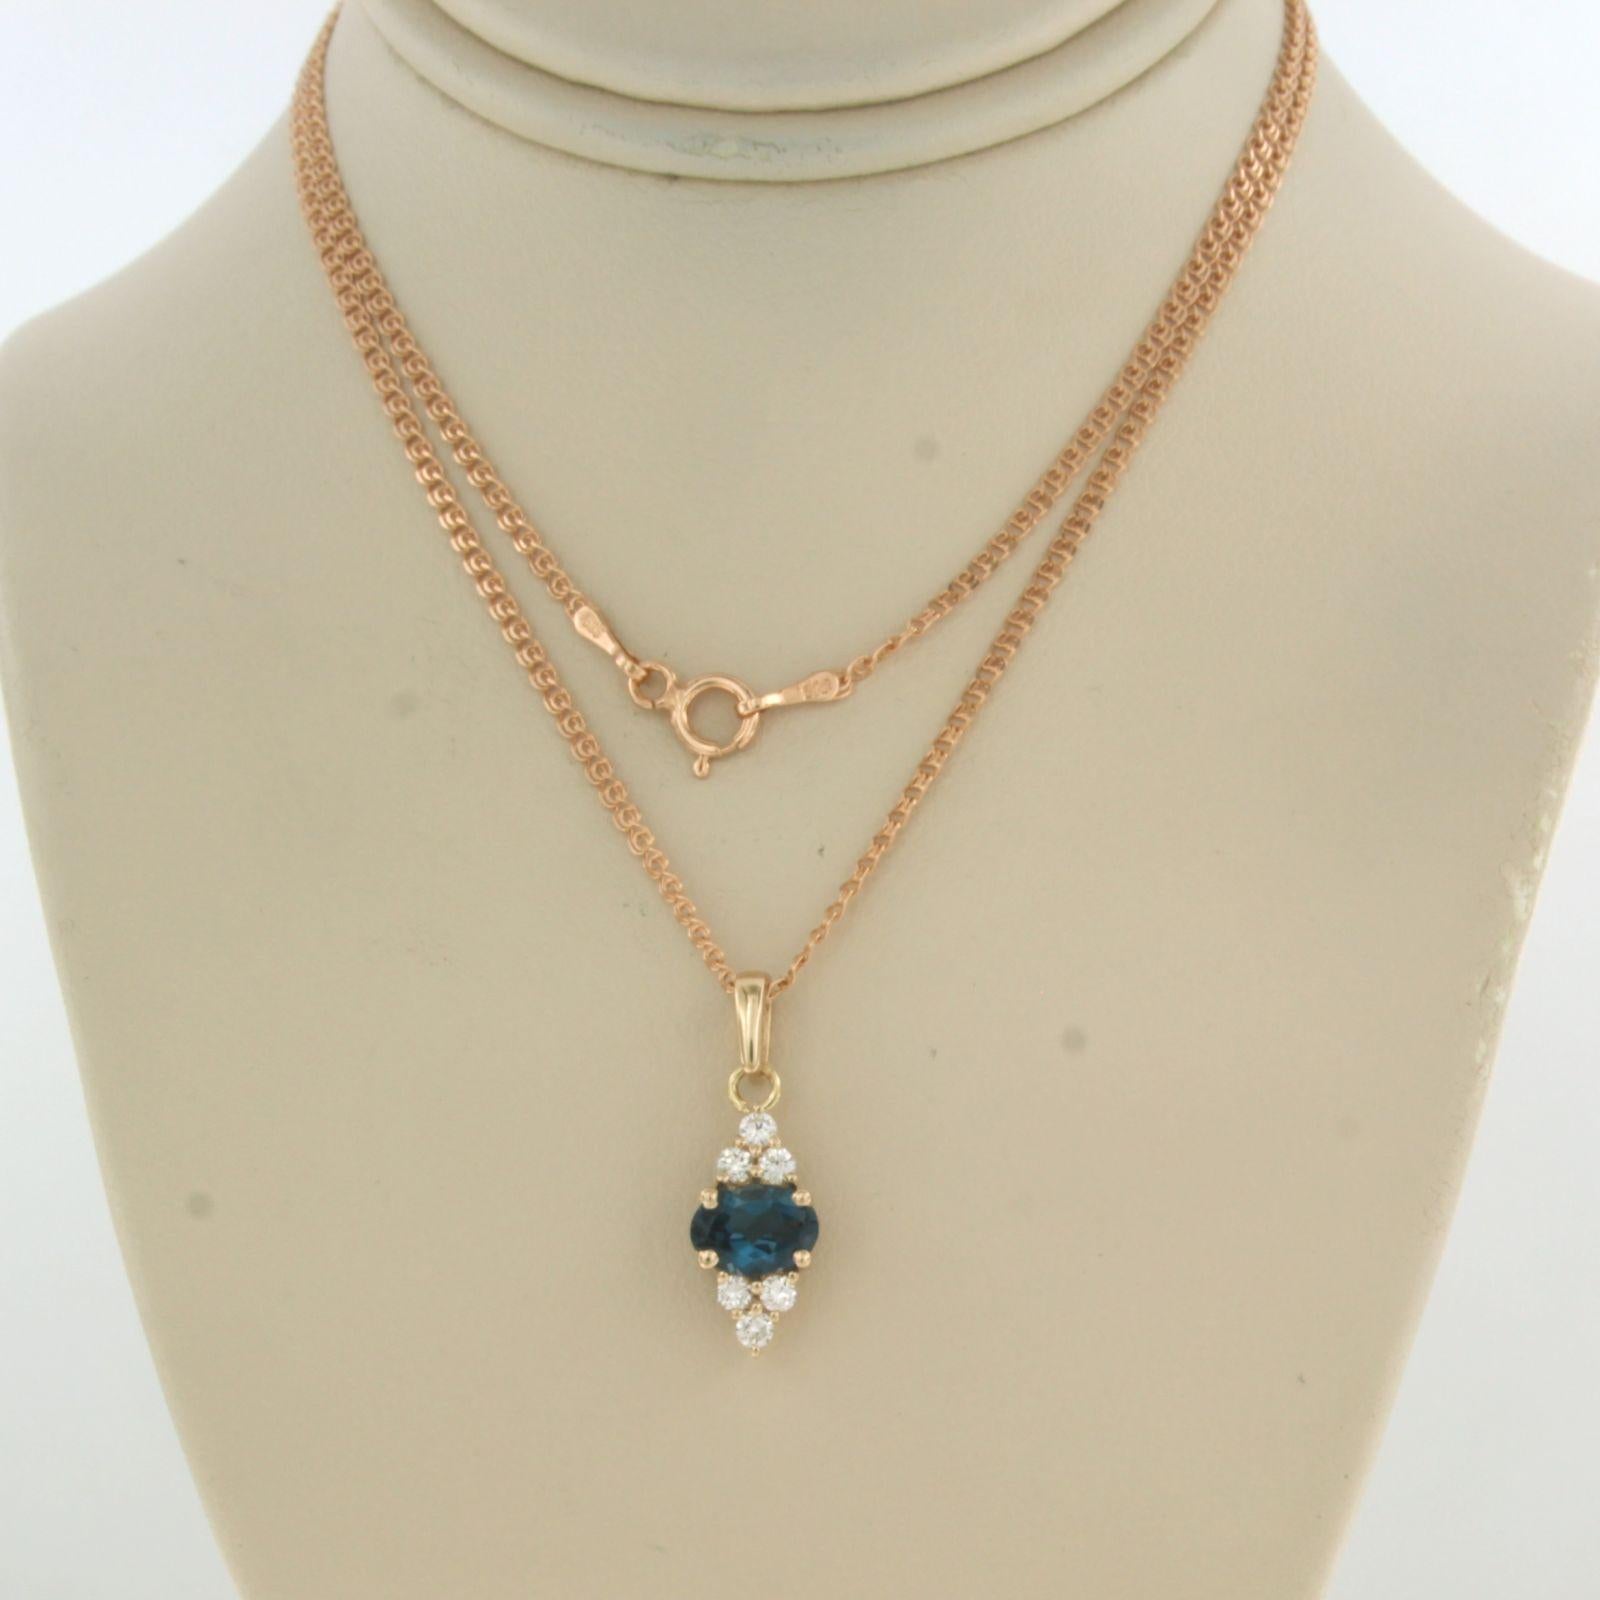 14k pink gold necklace with a pendant set with topaz. 0.90ct and brilliant cut diamonds up to 0.20ct - F/G - VS/SI - 45 cm long

detailed description:

the necklace is 45 cm long and 1.5 mm wide

The size of the pendant is 2.0 cm by 7.0 mm